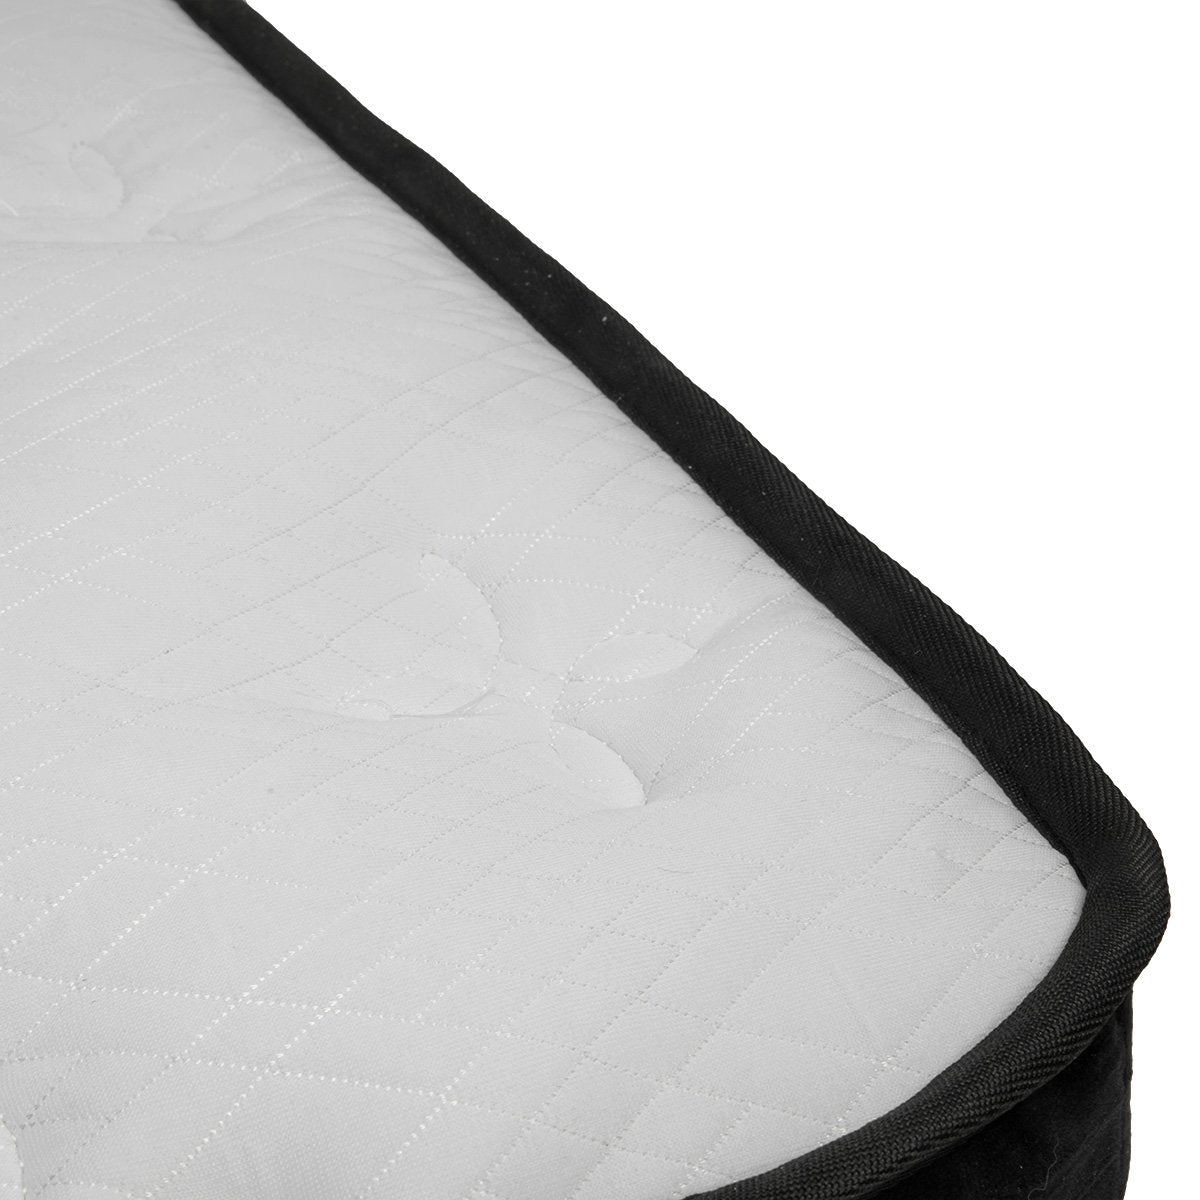 Laura Hill Single Mattress with Euro Top Layer - 32cm